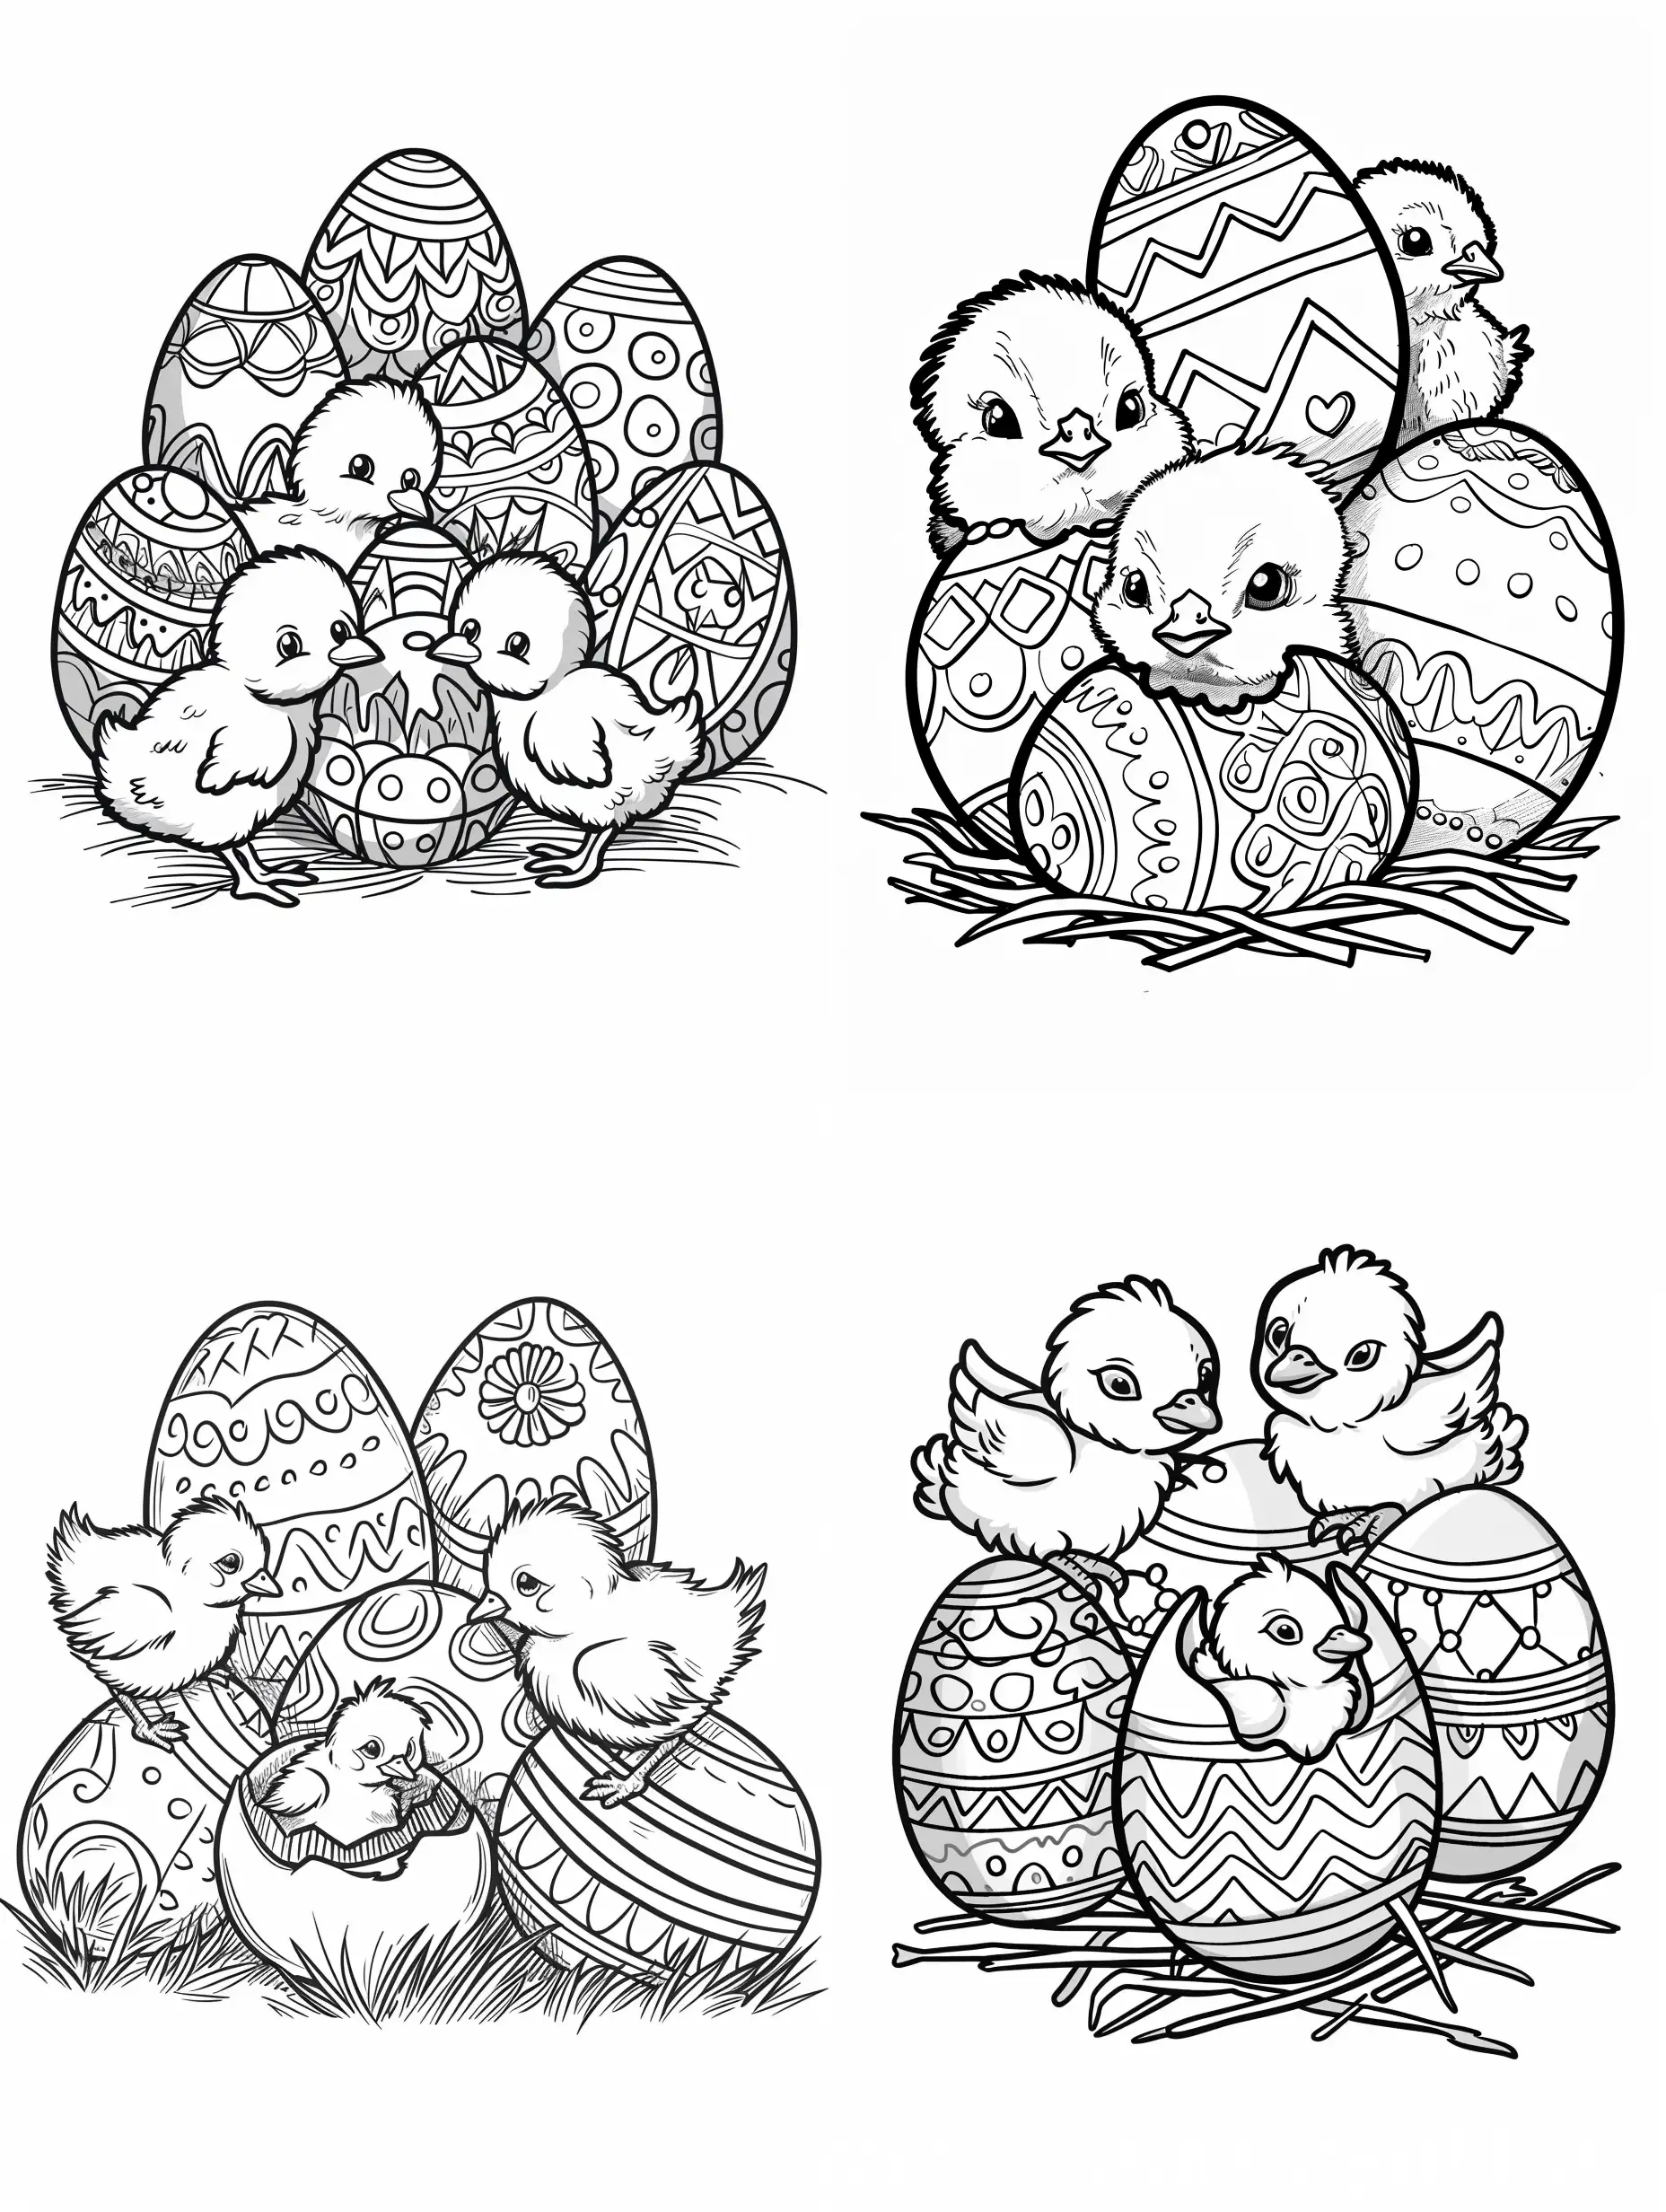 * Cute and simple group of chicks hatching from brightly decorated Easter eggs drawing for toddler coloring book, no gray scales on a white sheet with plain background without drawings